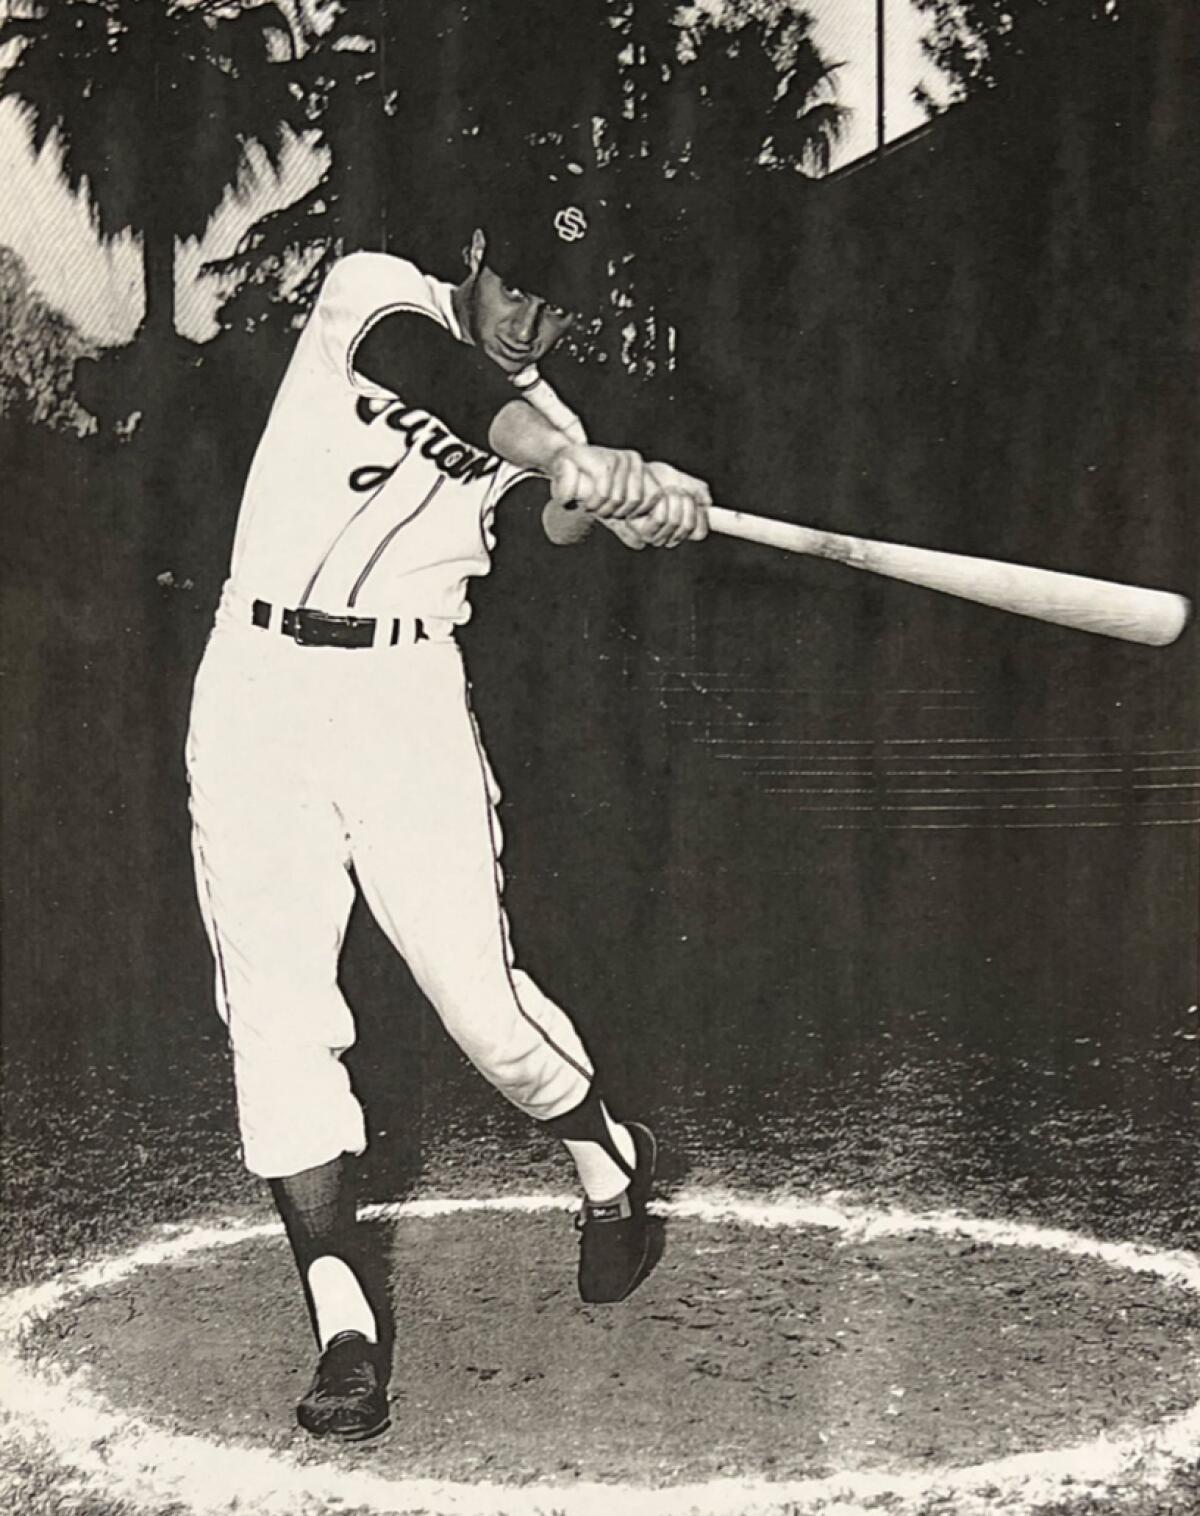  Jay Jaffe batted leadoff and played center field for USC in the late 1960s.